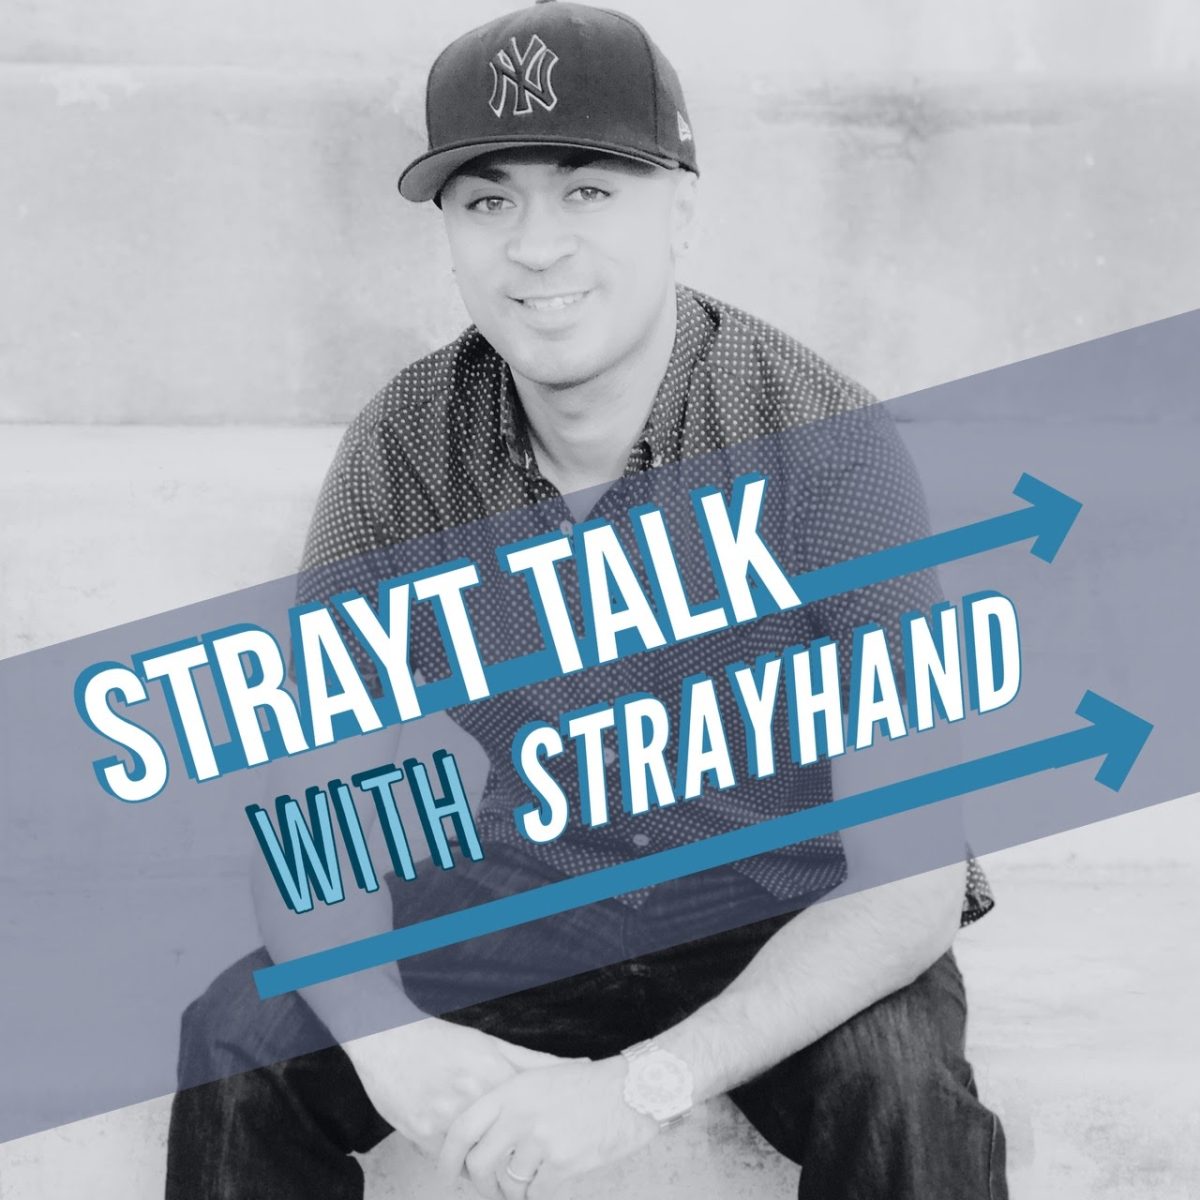 %E2%80%9CStrayt+Talk+with+Strayhand%2C%E2%80%9D+hosted+by+Oddie+Strayhand%2C+is+a+weekly+podcast+series+based+in+Elk+Grove%2C+Calif.+The+podcast+aims+to+highlight+local+and+national+athletic+and+business+success+stories+and+is+currently+streaming+in+14+countries.